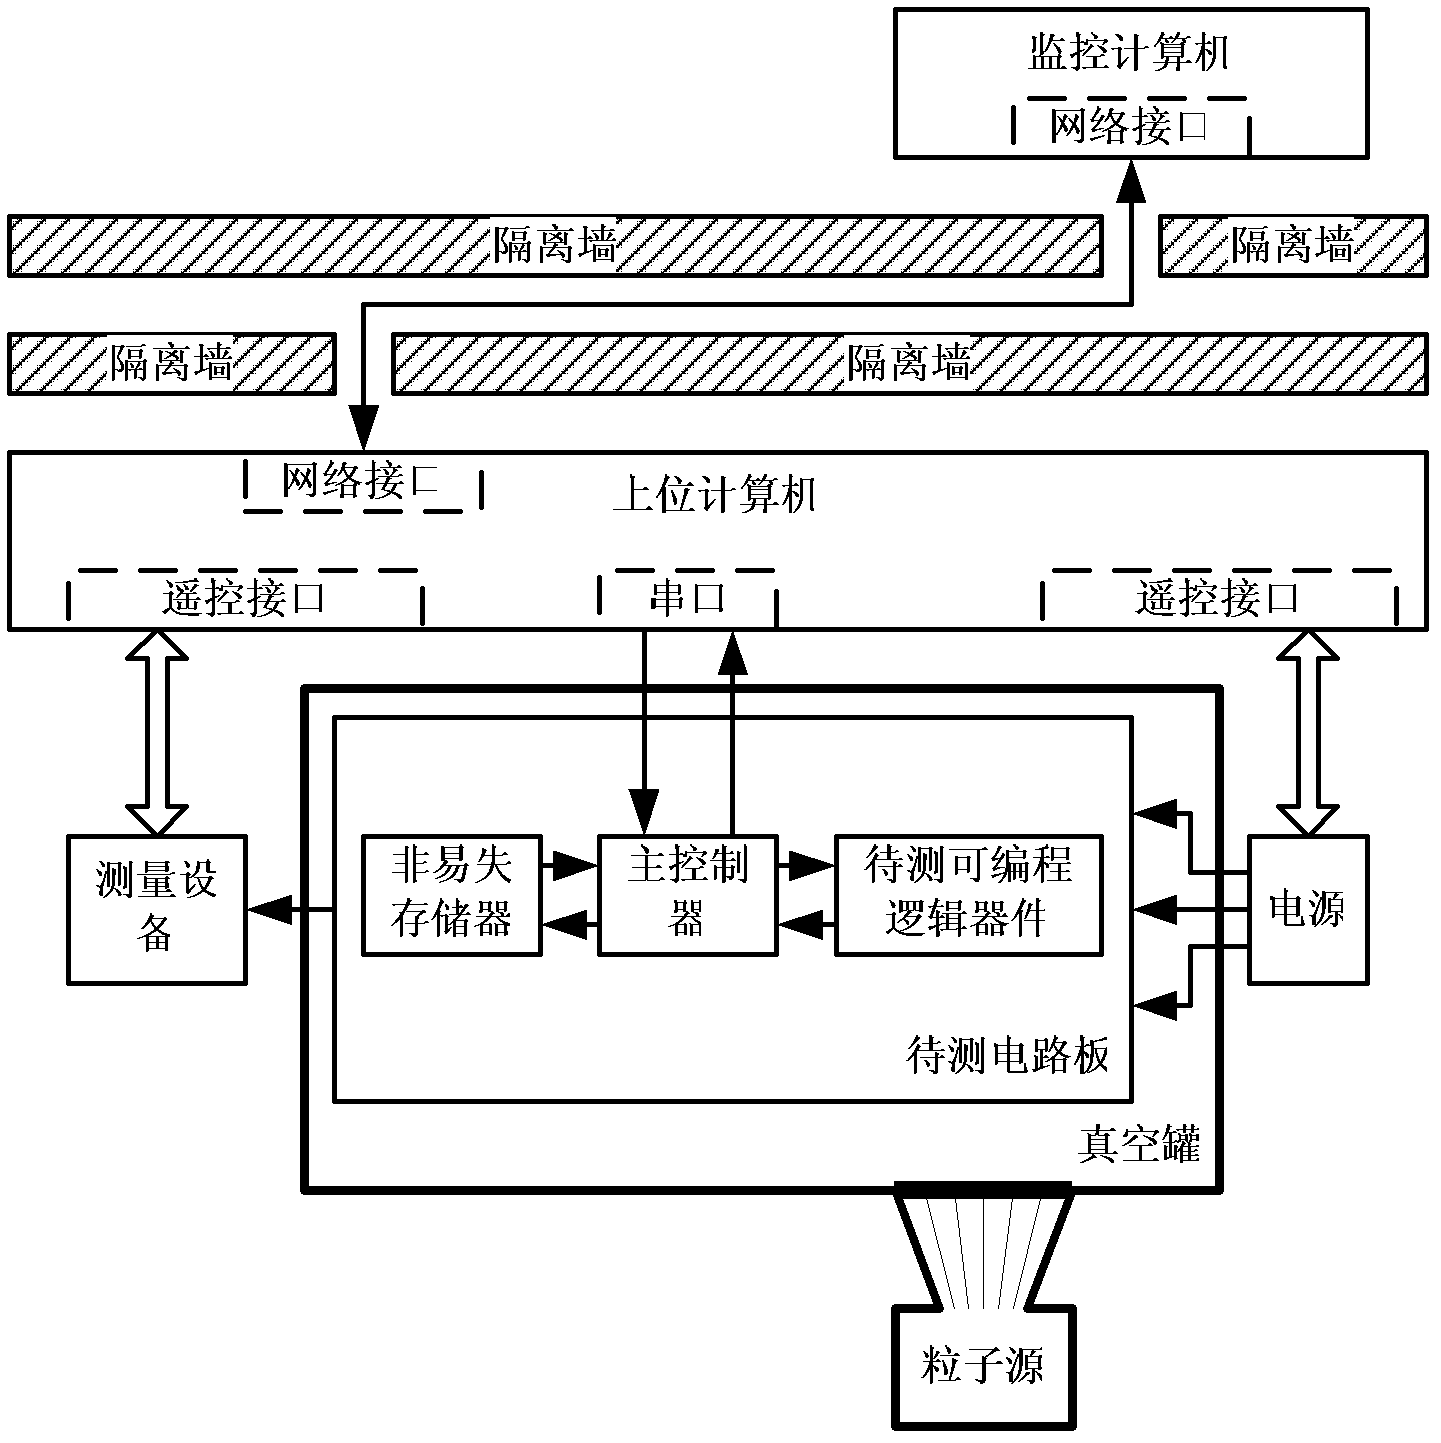 System for testing single particle irradiation performance of programmable logic device